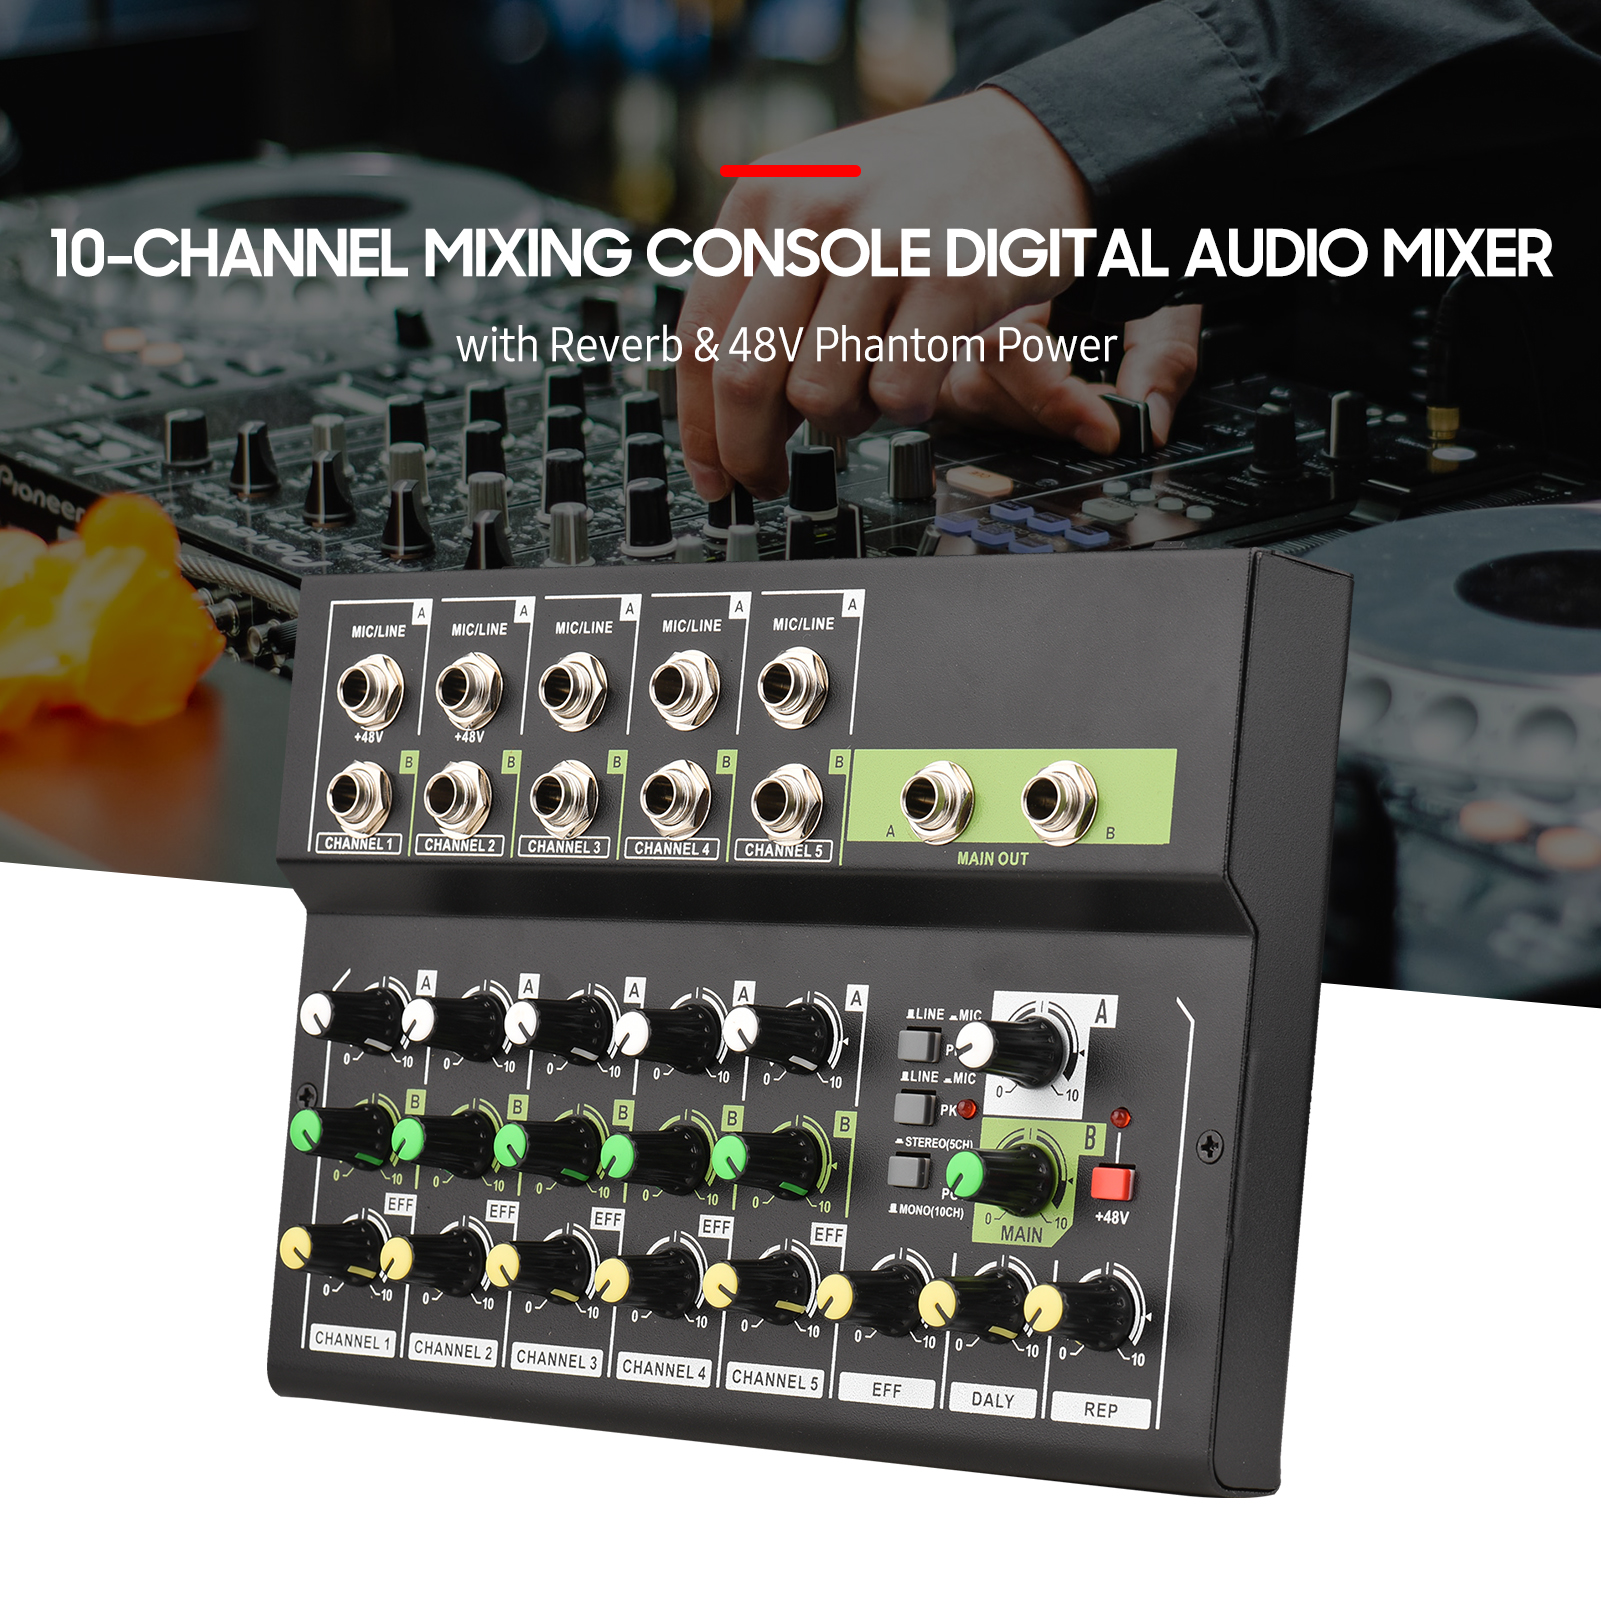 us plug input jacks 100?240V Portable 10?Channel Stereo Audio Sound Mixer for Karaoke Microphone Amplifier Console Audio Mixer with 10 microphone/wire for RCA 